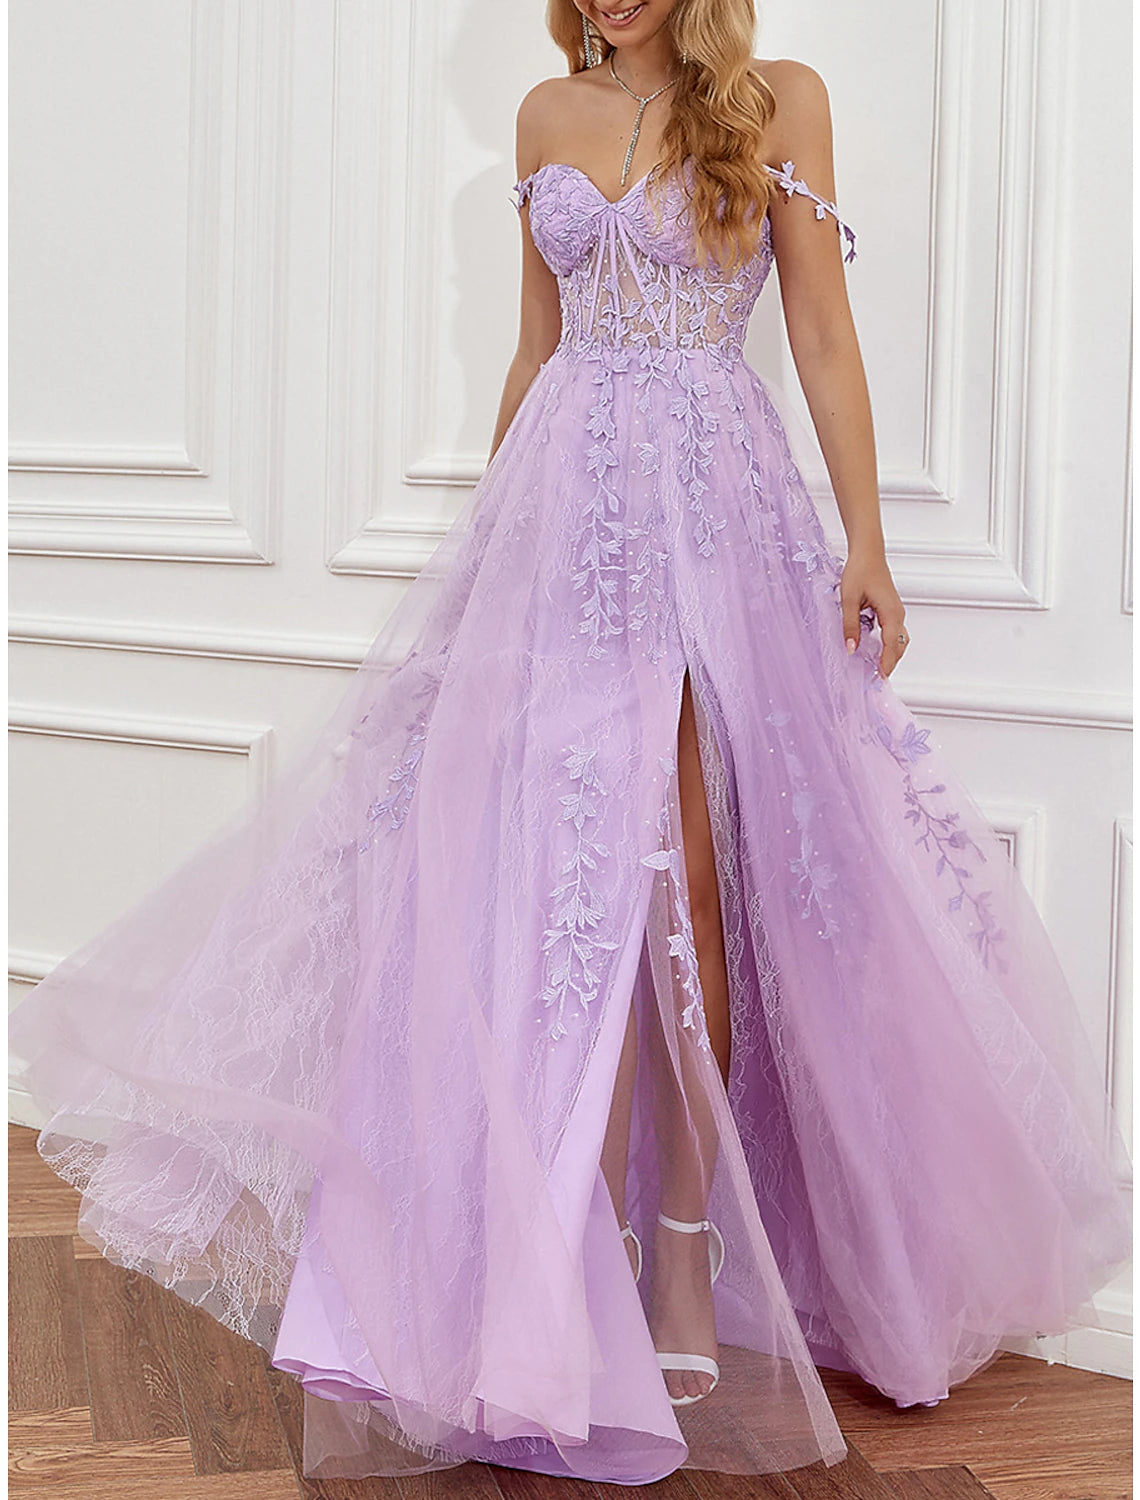 A-Line Prom Party Dress See Through Dress Formal Prom Sweep / Brush Train Sleeveless Sweetheart Tulle Backless with Beading Slit Appliques